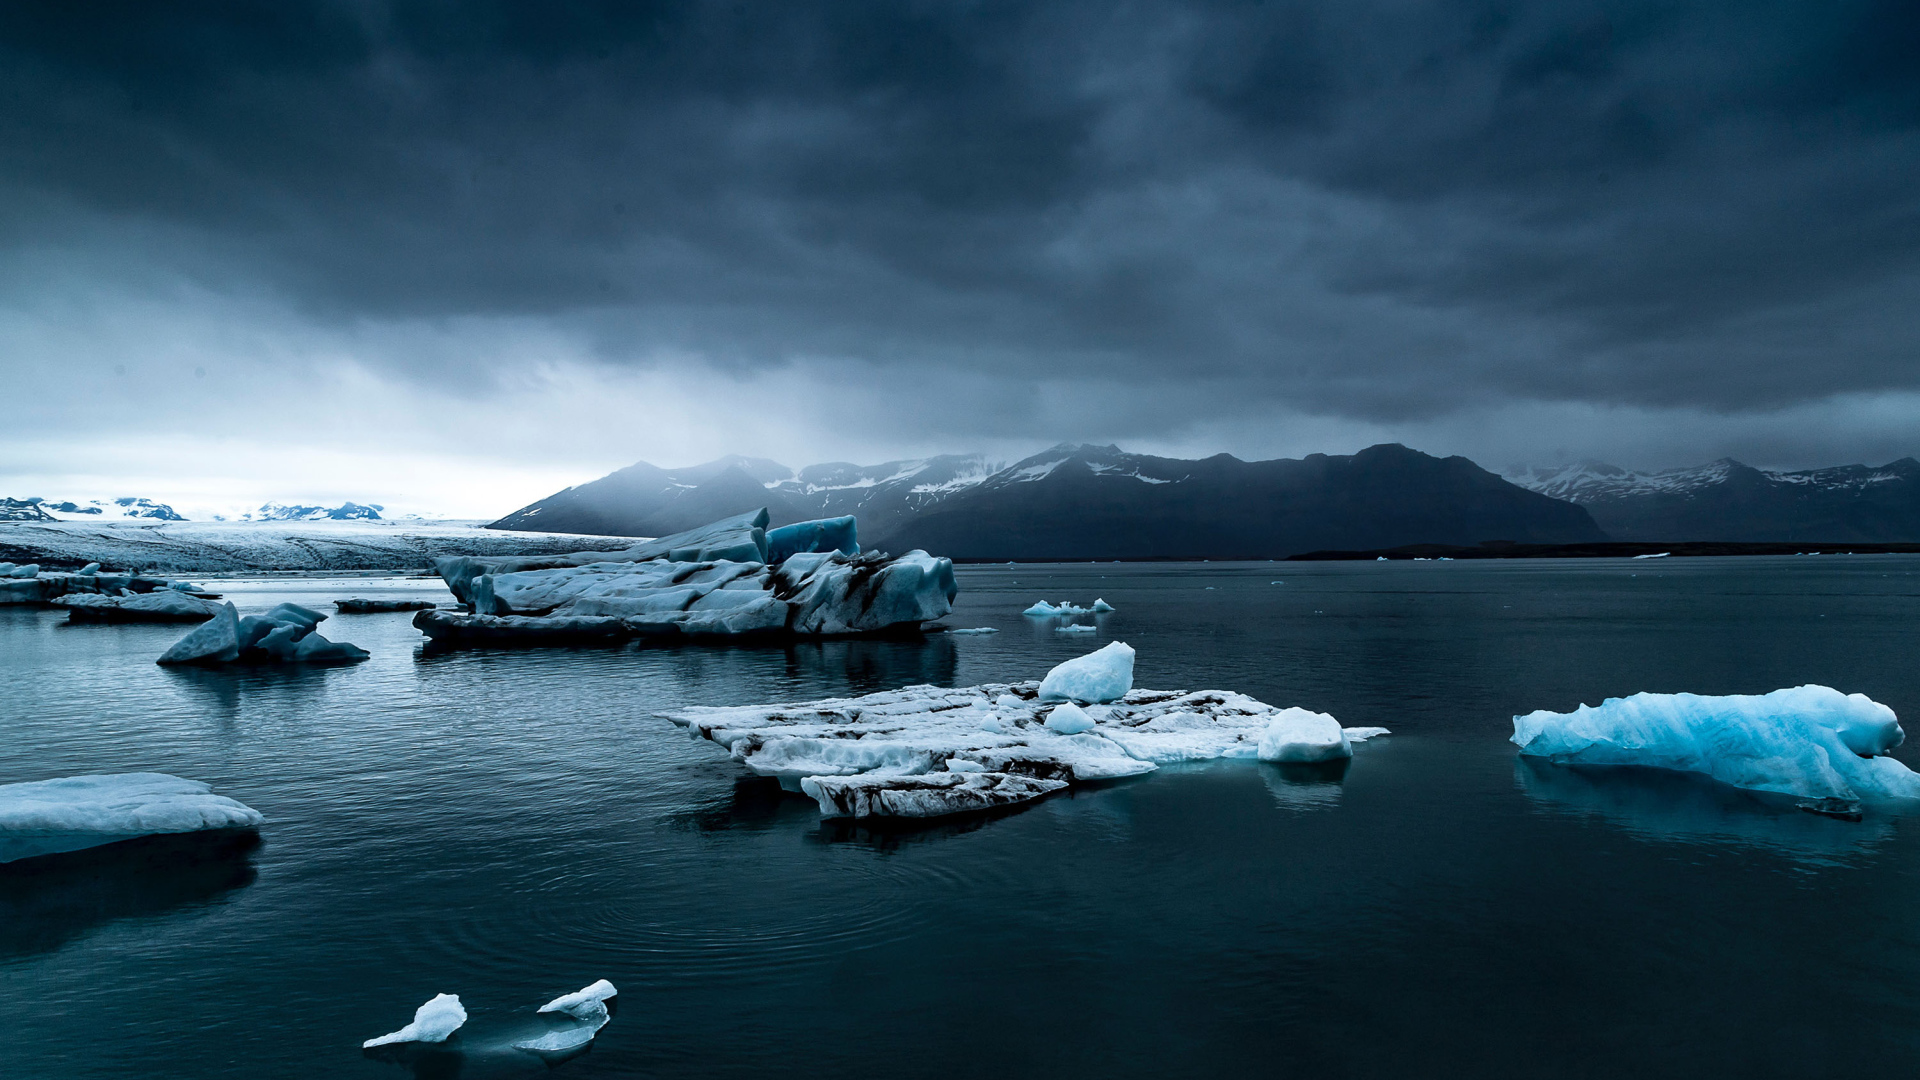 Large blue ice floes in the water under a cloudy sky